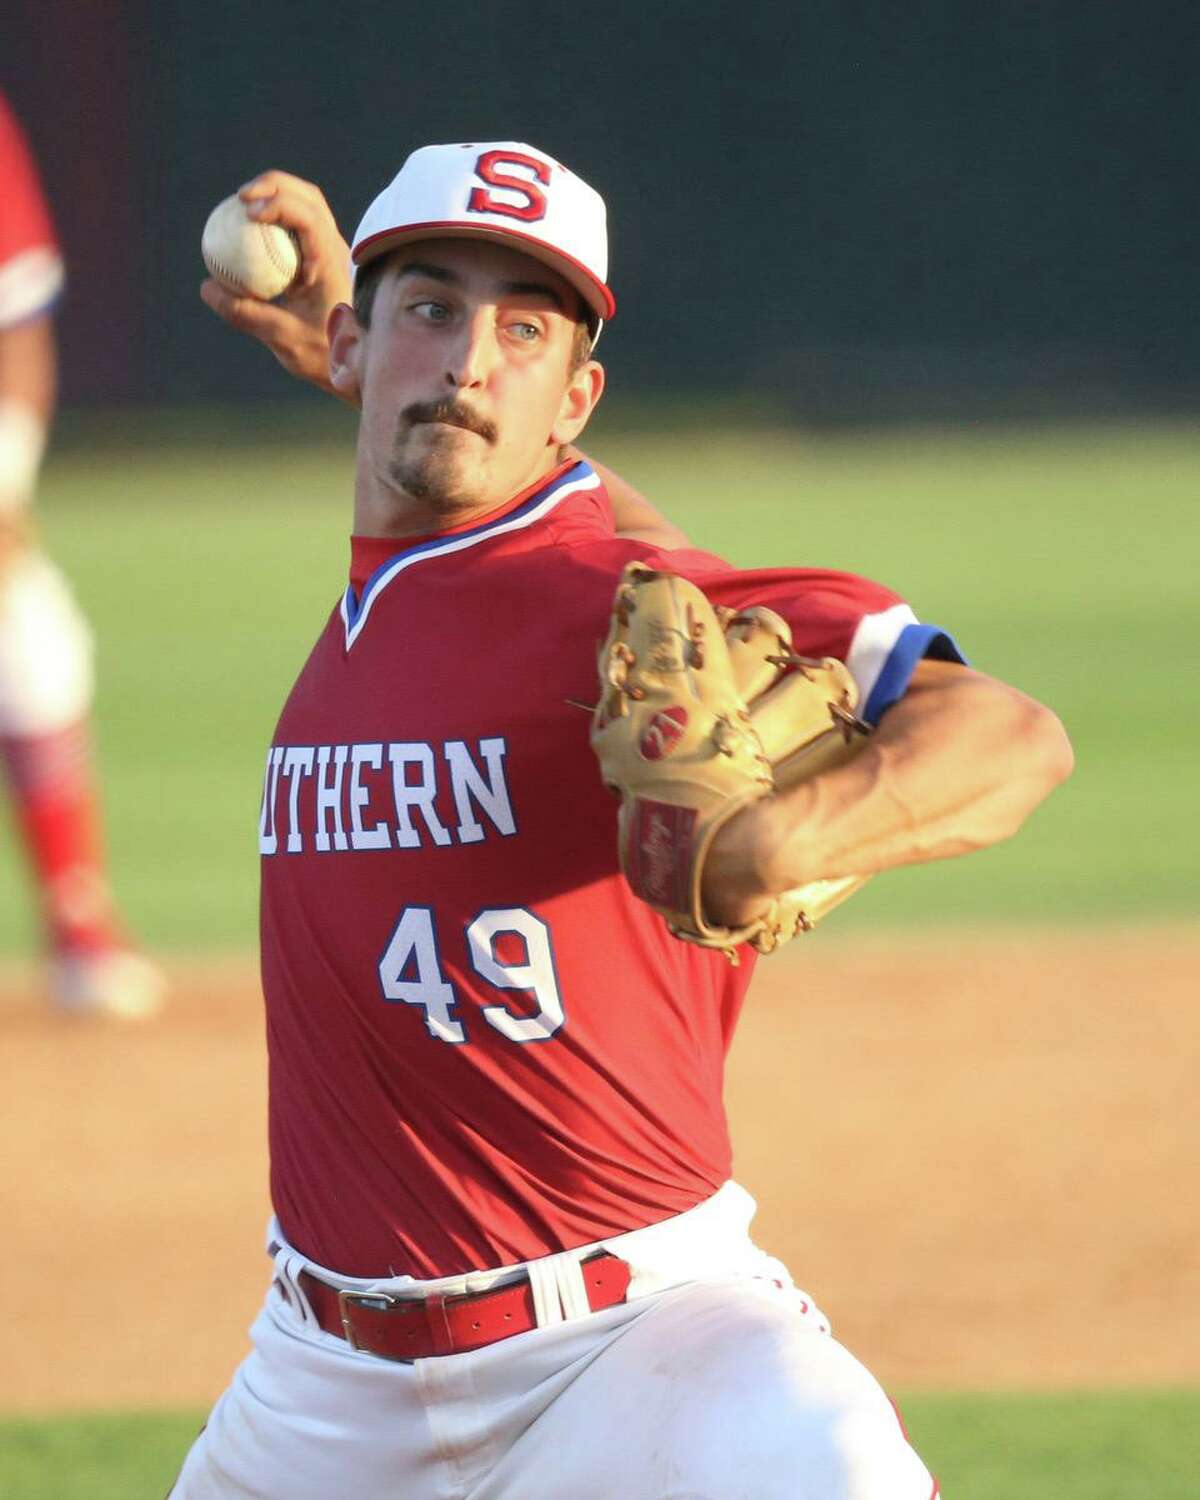 Greenwich’s J.T. Hintzen dominated as a senior at Florida Southern in 2018, going 14-0 and being selected in the 10th round of the MLB Draft by the Milwaukee Brewers.